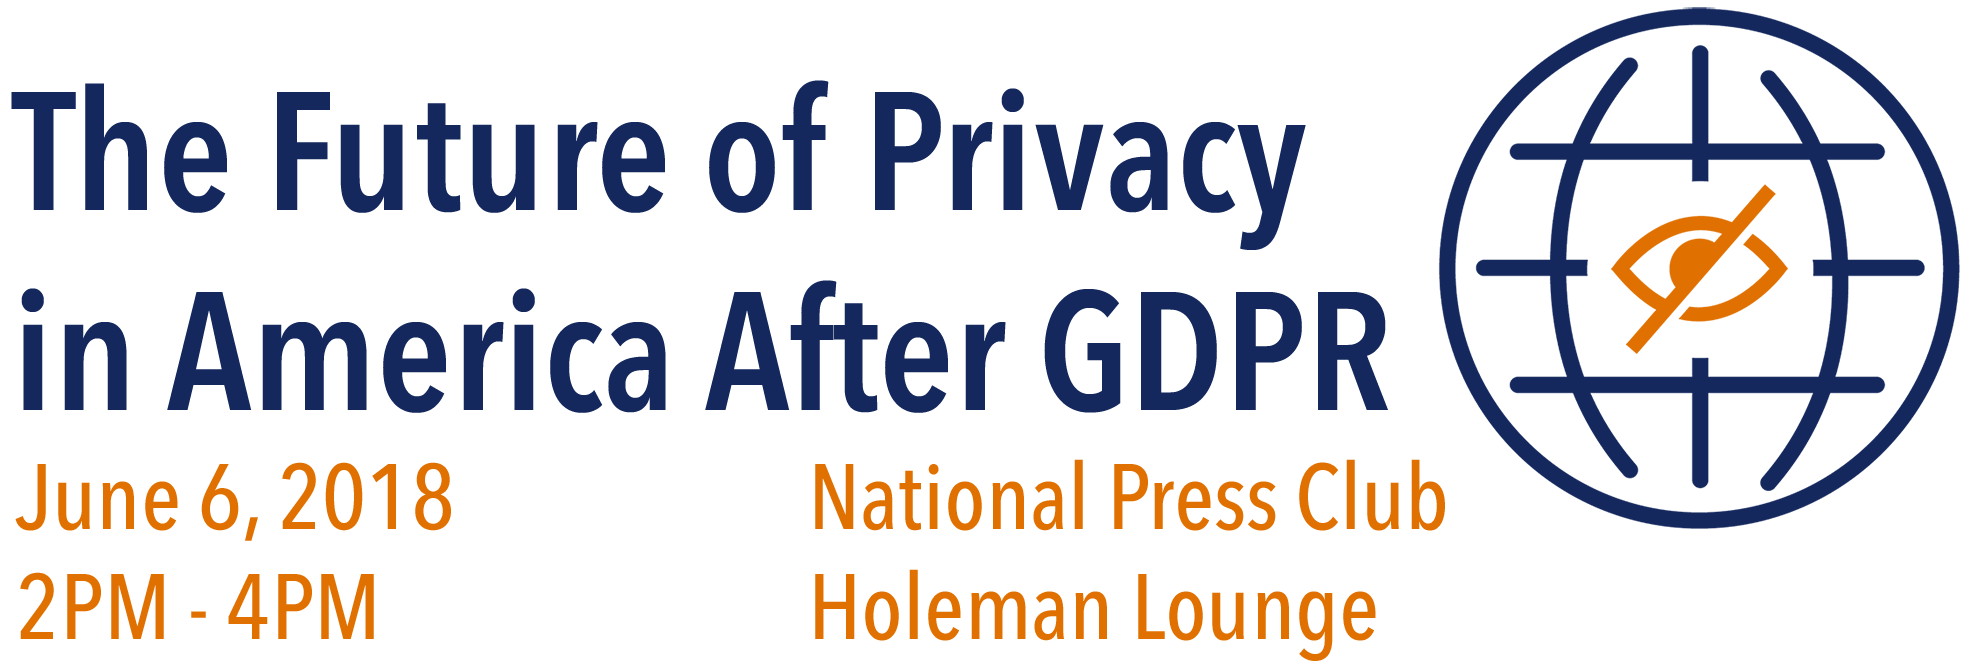 The Future of Privacy in America After GDPR logo